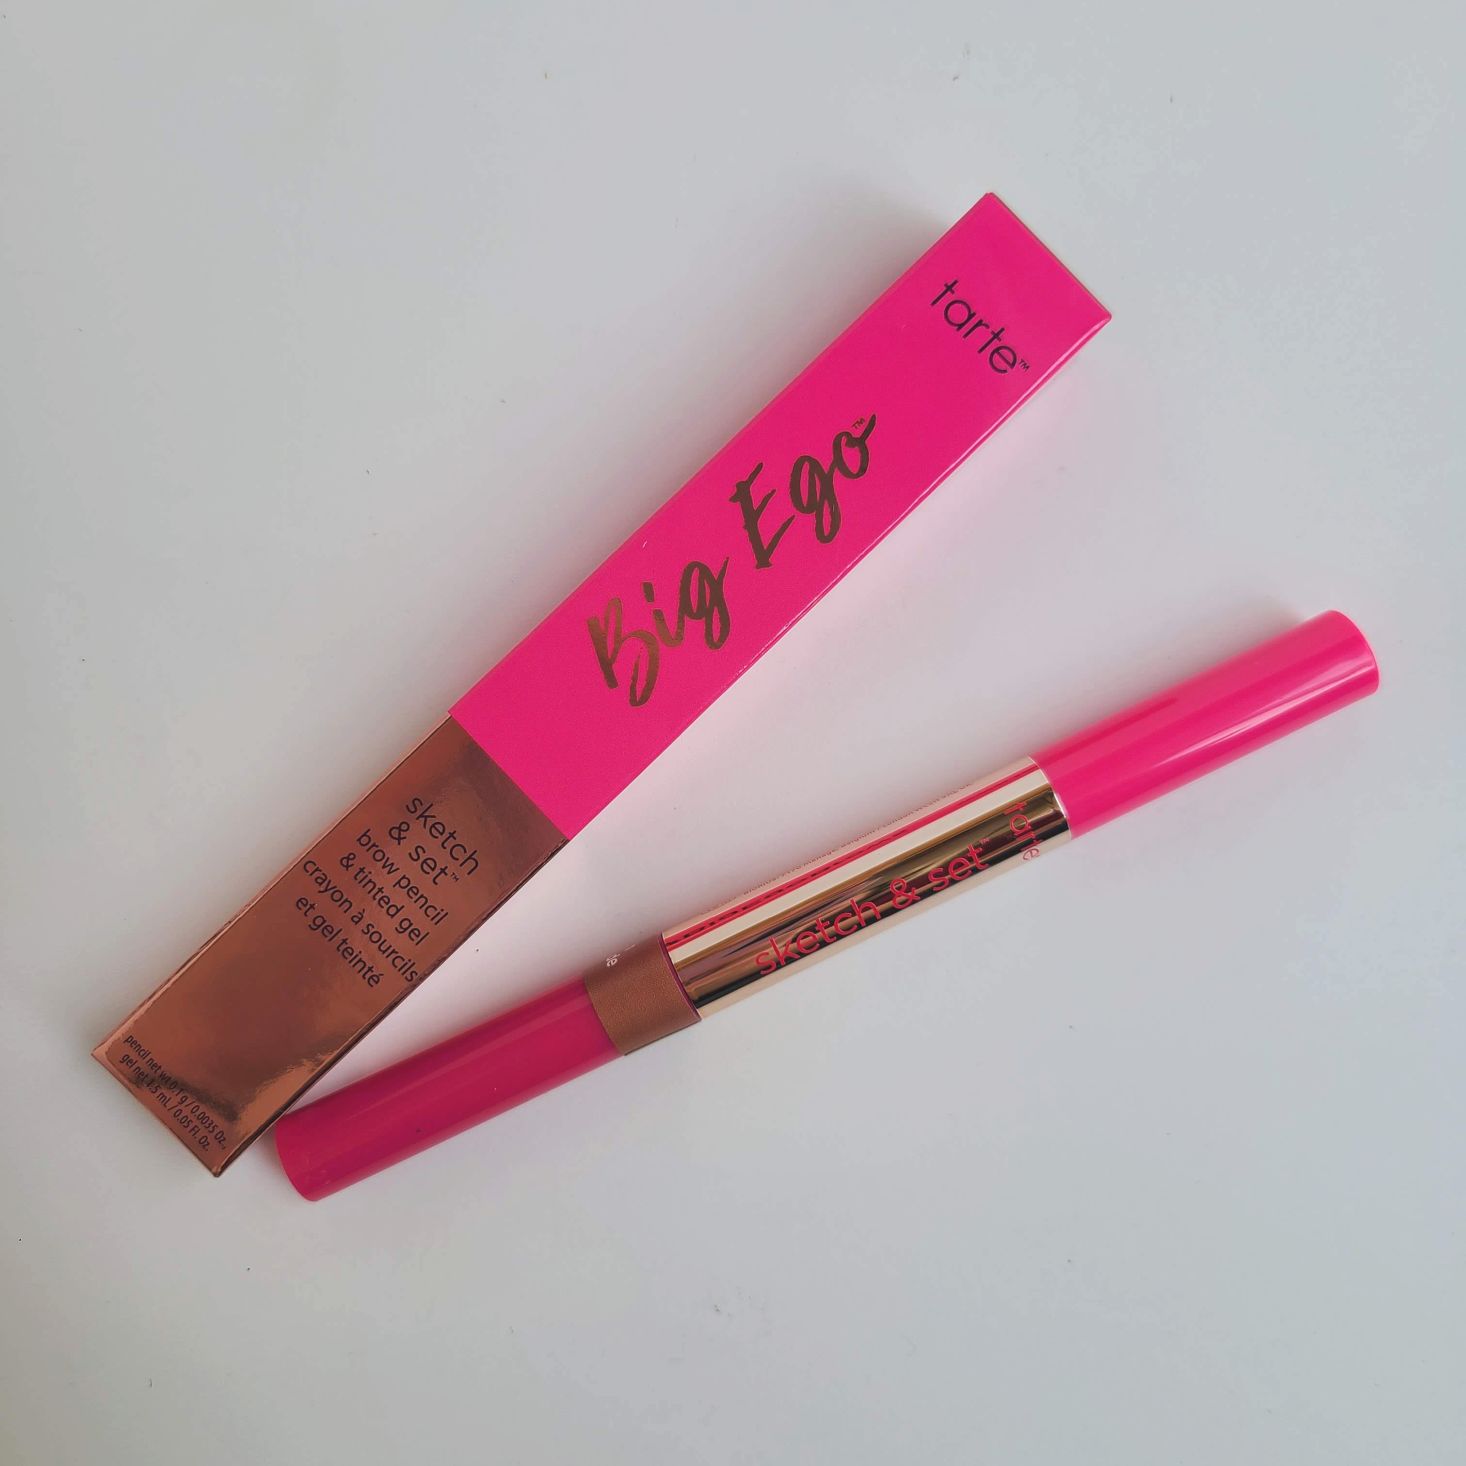 Tarte Create Your Own Kit August 2020 brow pencil